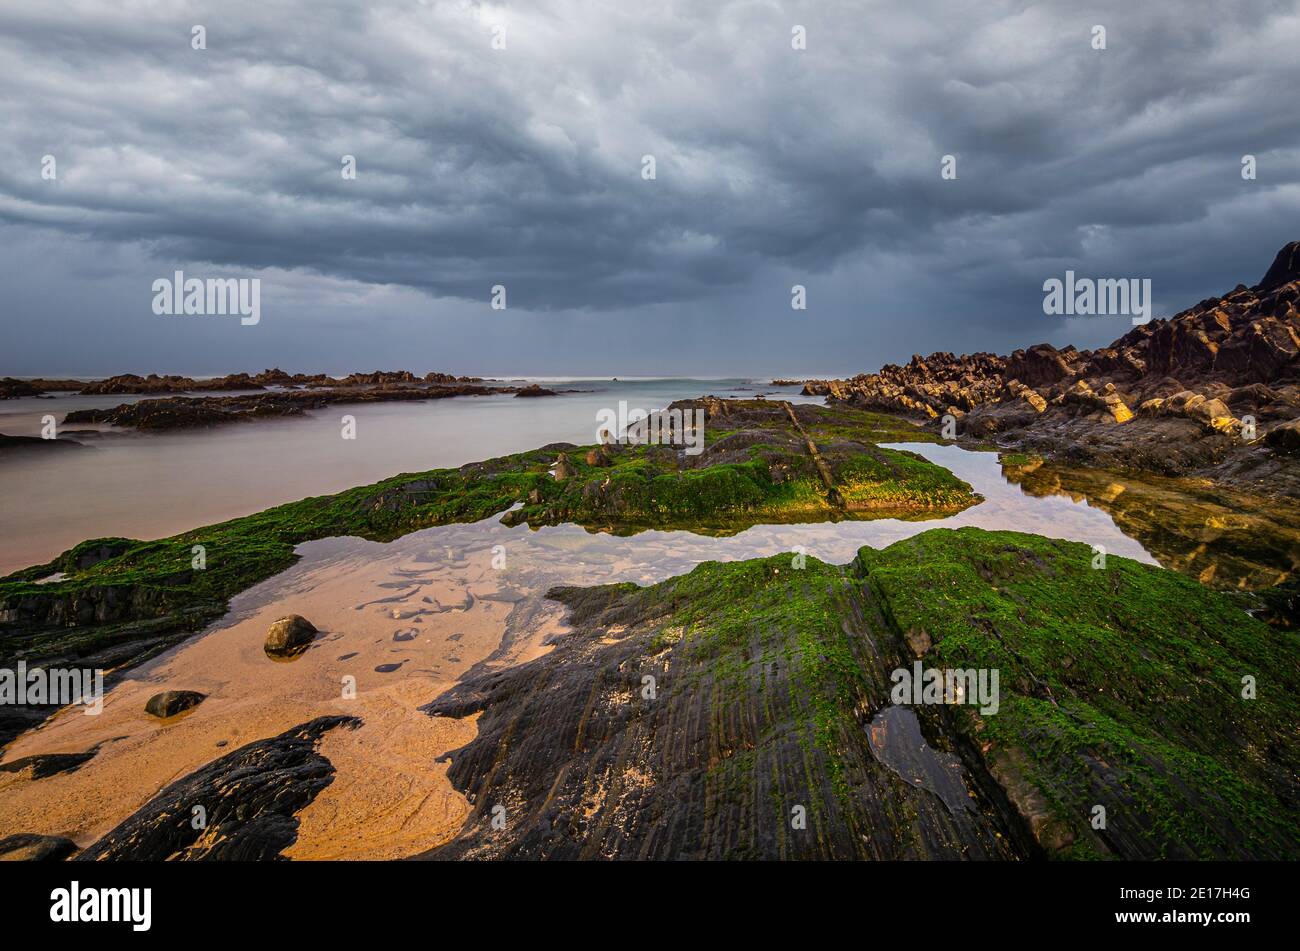 Stone with moss and rugged rocks with small pools of water on Almograve beach Stock Photo